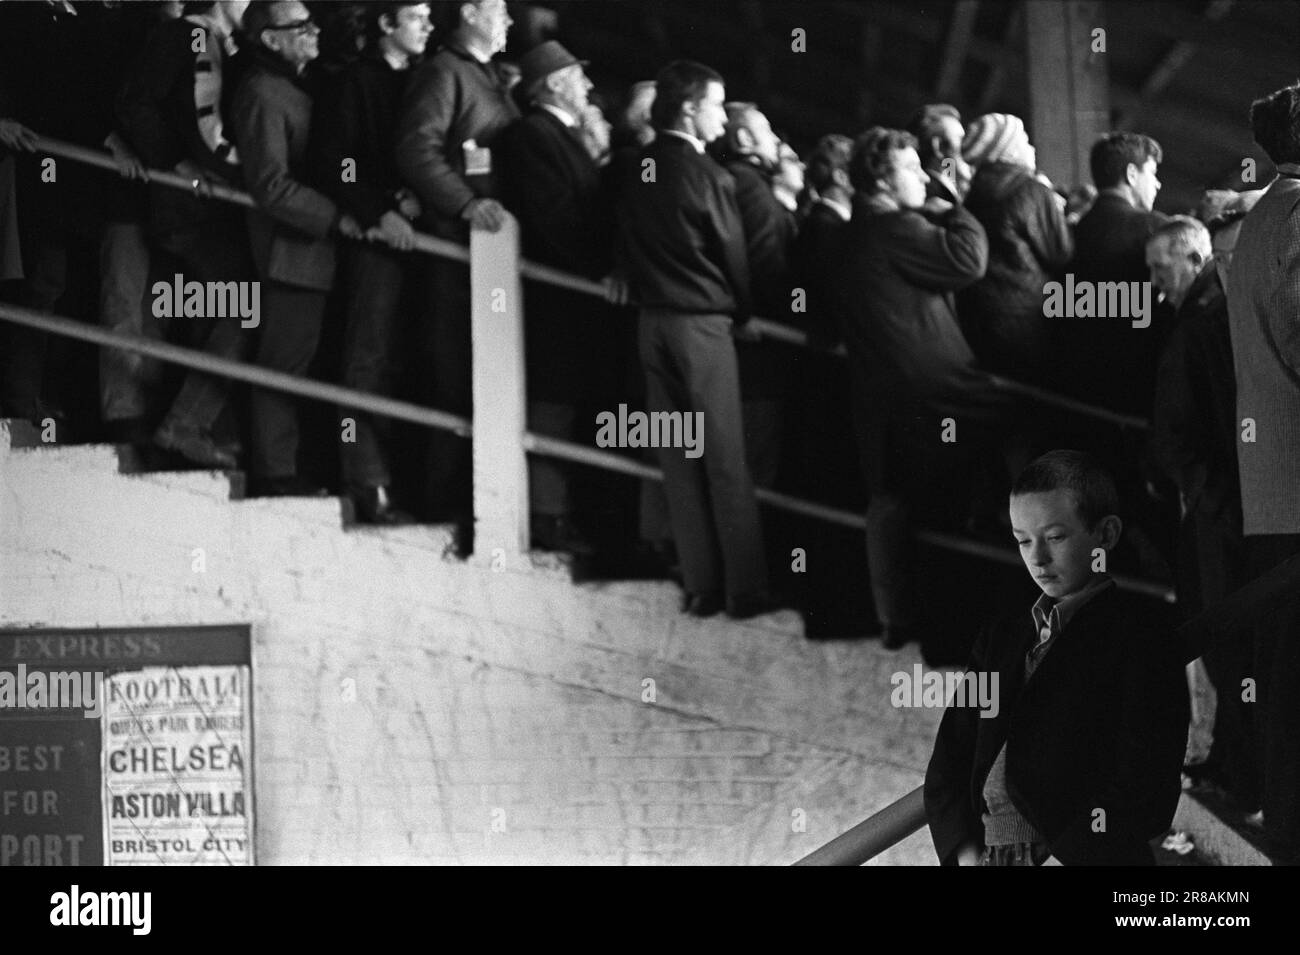 The Shed at Chelsea football Ground Stamford Bridge. Jeune skinhead ne regardant pas le football dans le Shed au stade de football de Chelsea. Londres, Angleterre vers 1970. 1970S ROYAUME-UNI HOMER SYKES Banque D'Images